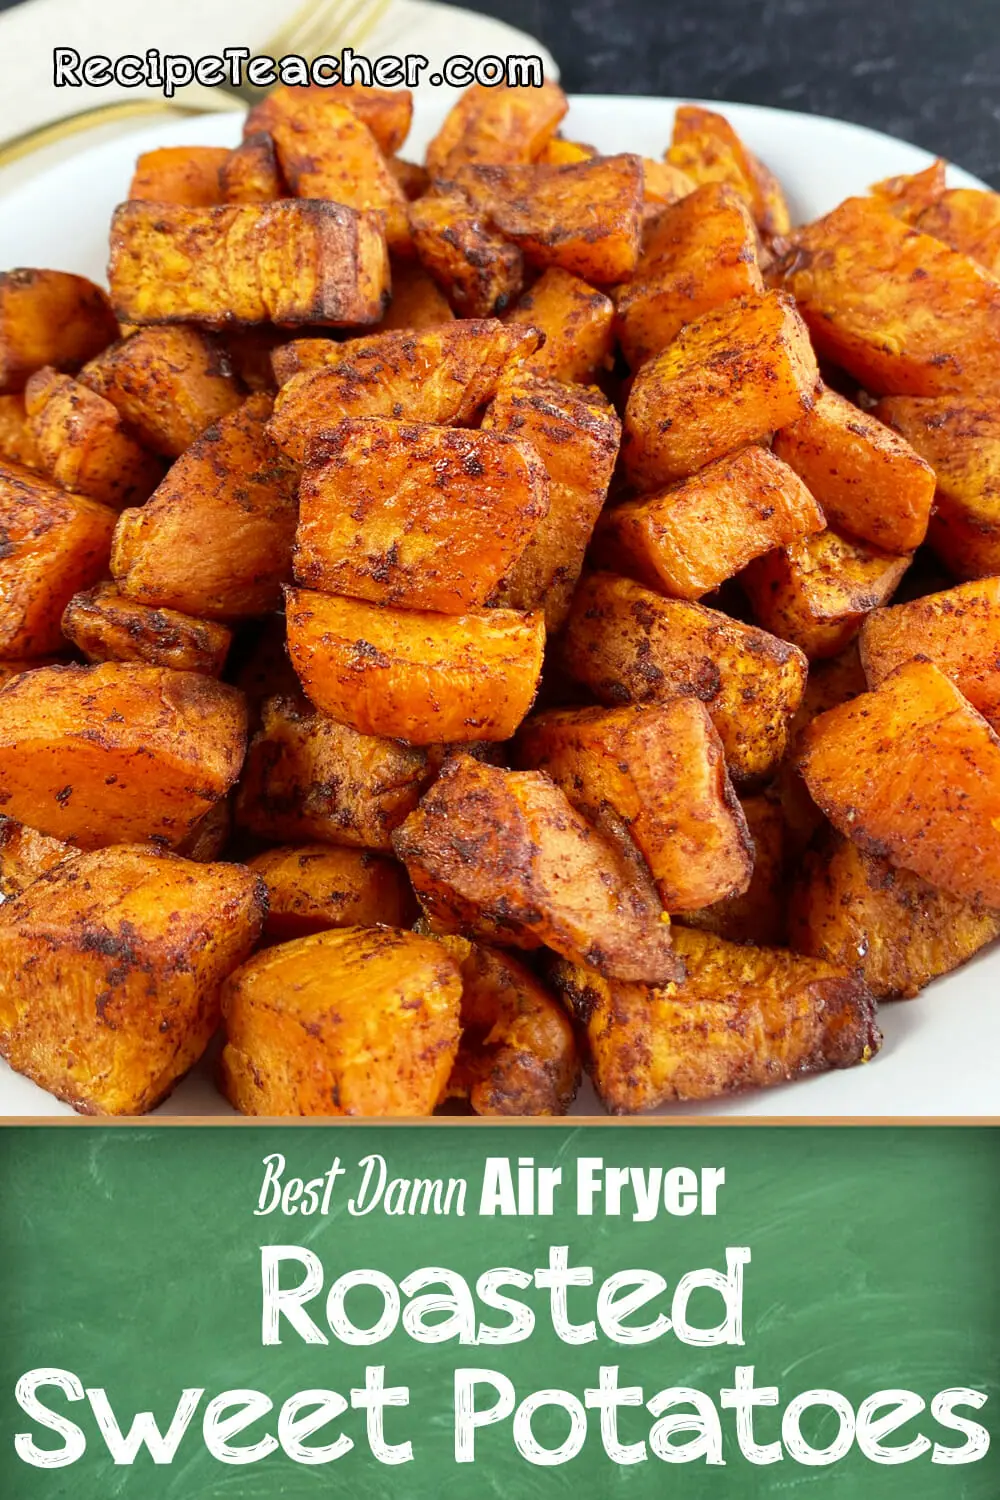 Recipe for roasted air fryer sweet potatoes.